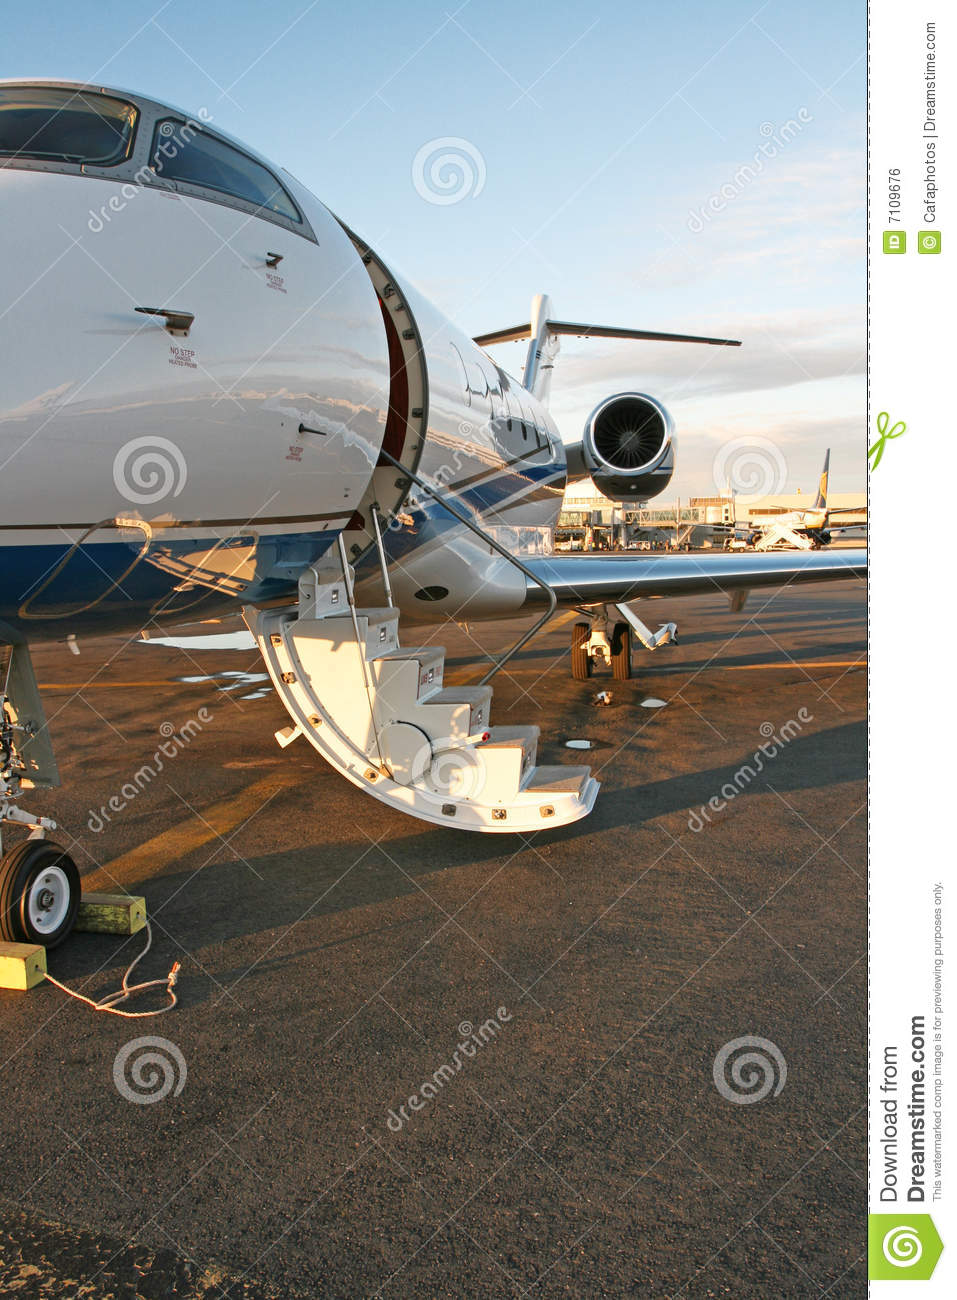 Private Business Jet Royalty Free Stock Image   Image  7109676